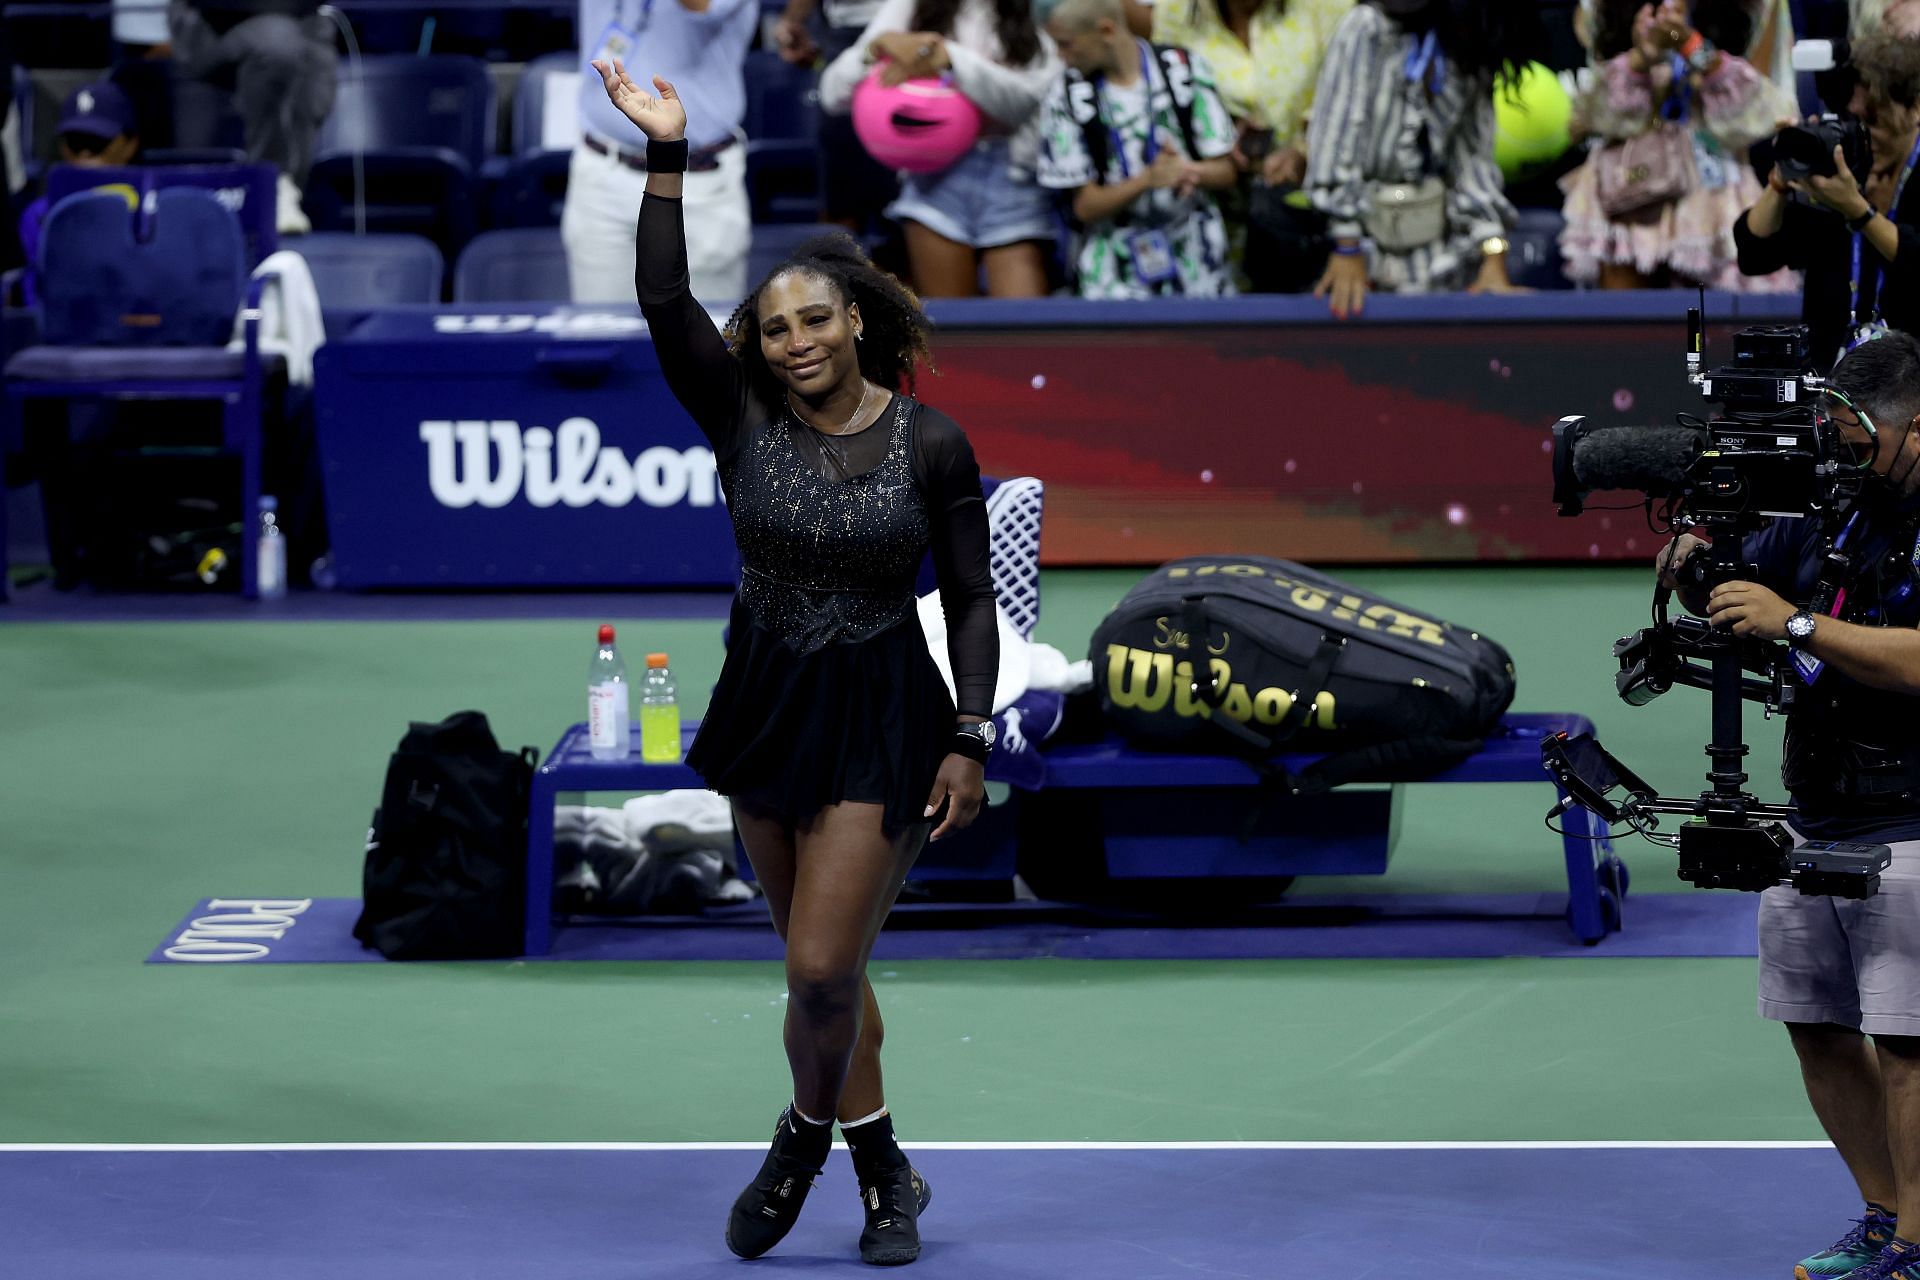 Serena Williams at the 2022 US Open - Day 5